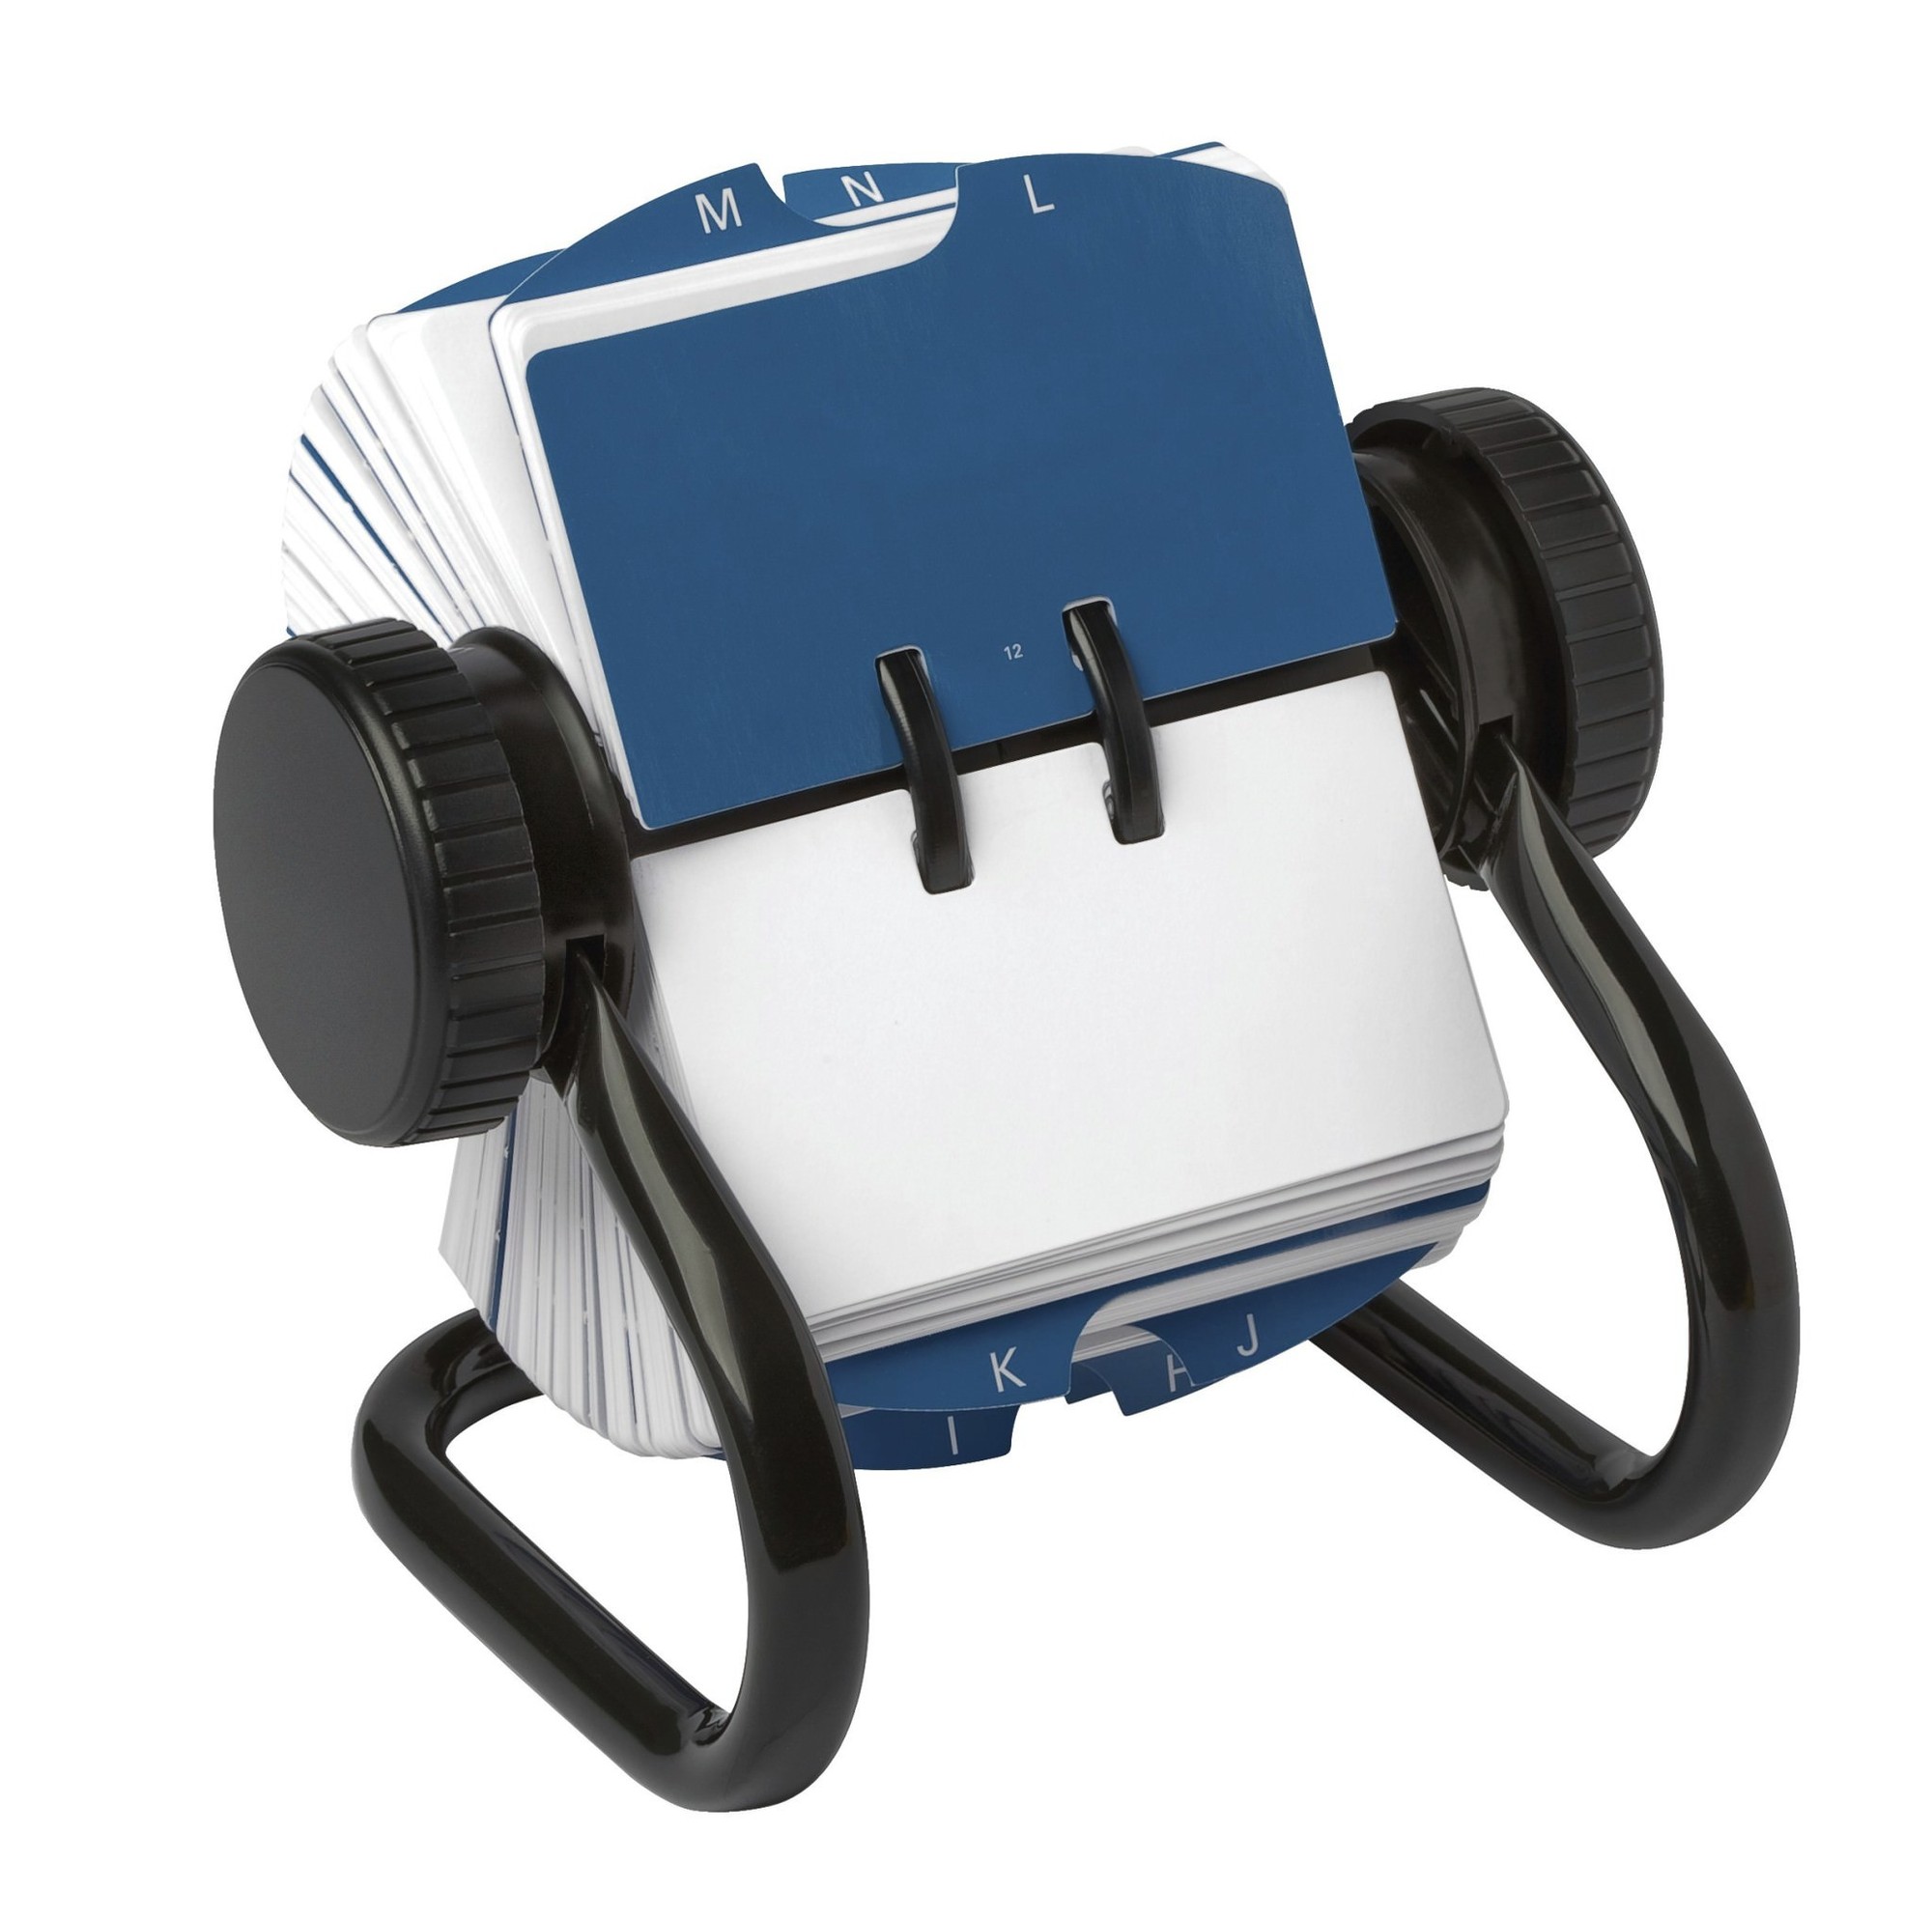 Rolodex Open Classic Rotary Files - 500 Card Capacity - For 2.25" x 4" Size Card - 24 A to Z Index Guide - Black